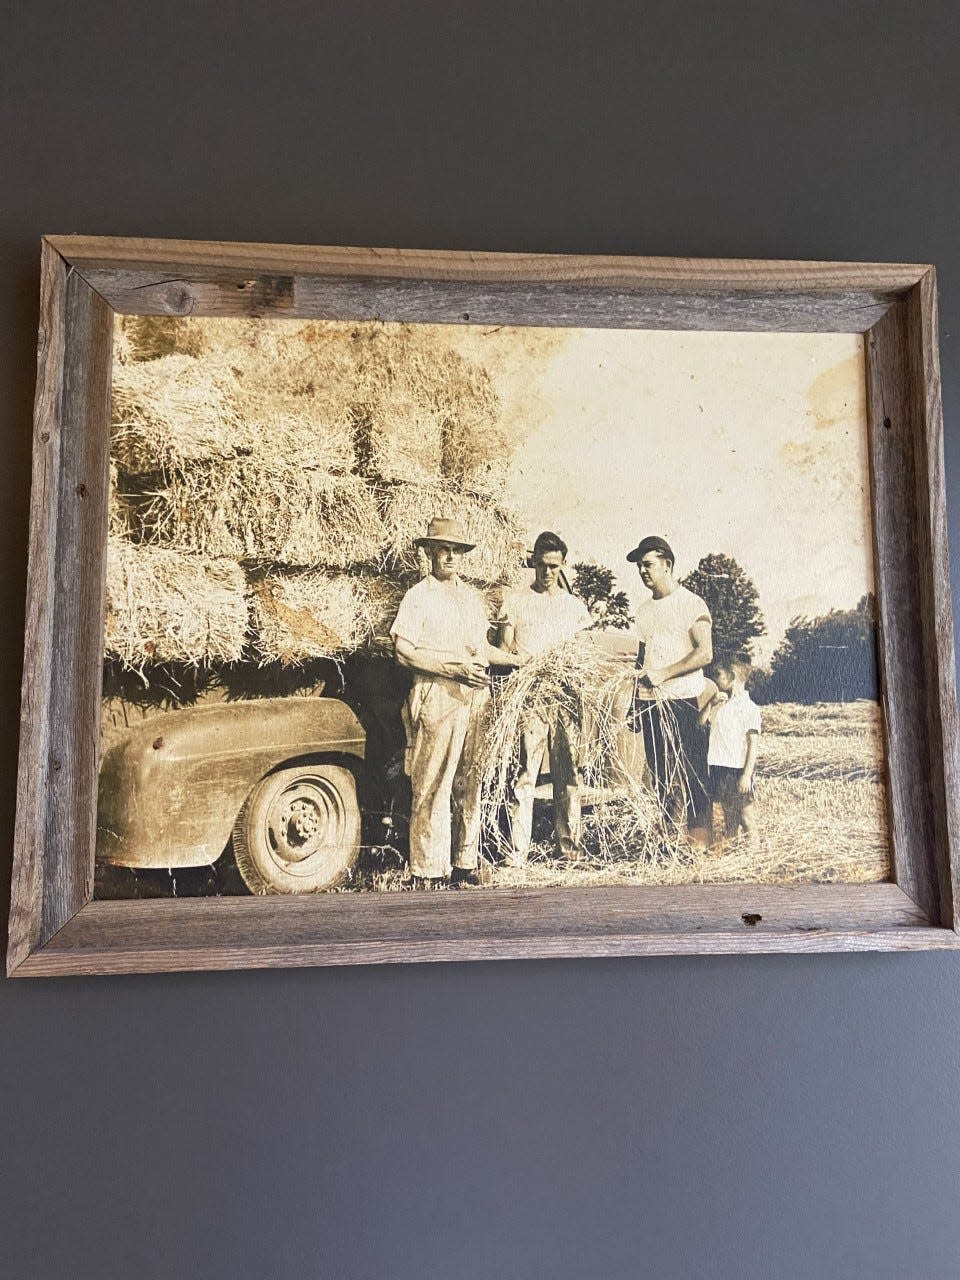 Vintage family photographs hang in some of the venues at Red Gate Farms.